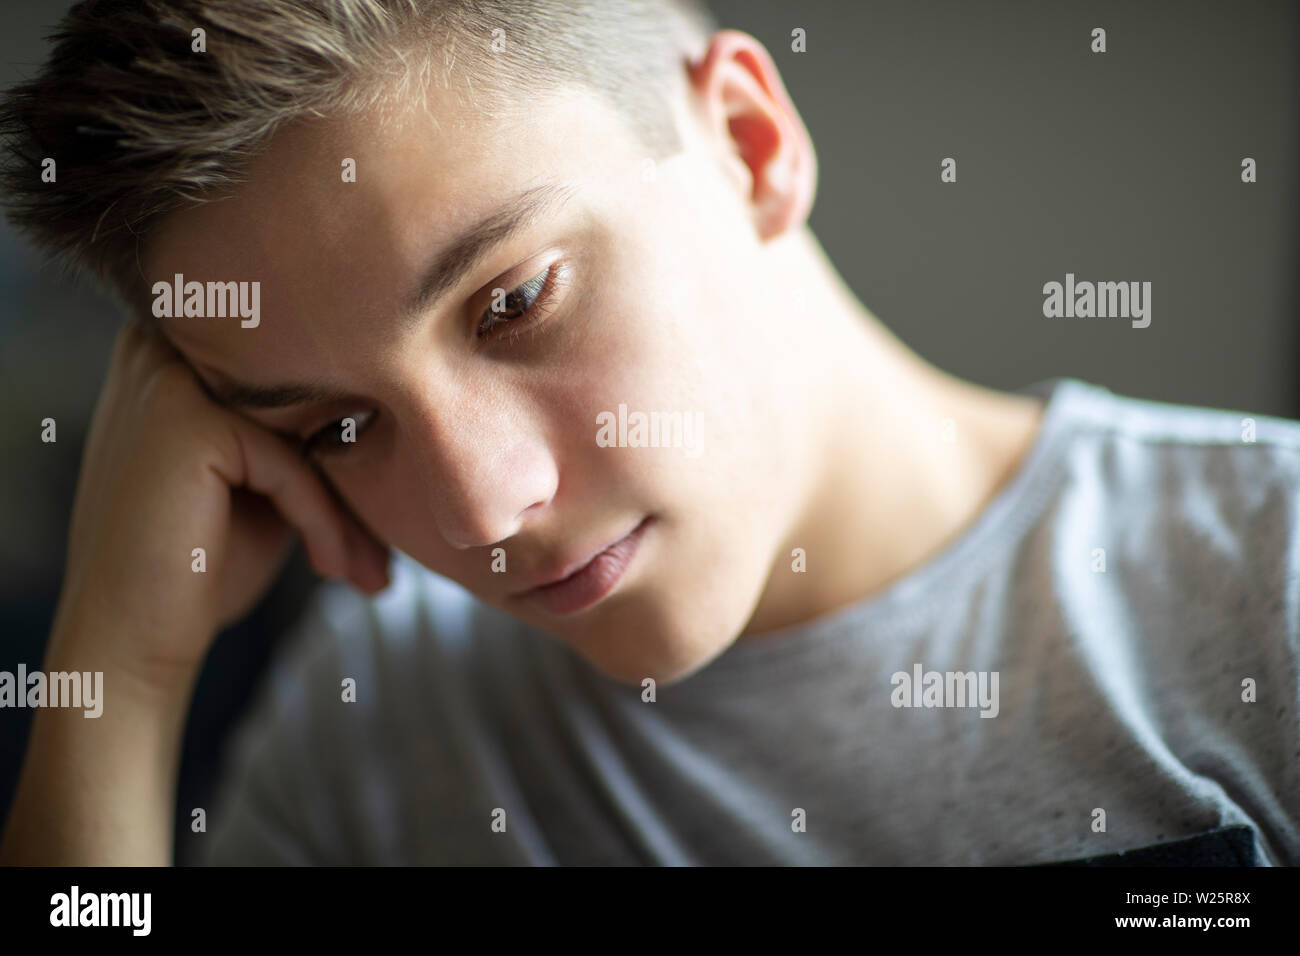 Close Up Of Unhappy And Depressed Teenage Boy At Home Stock Photo